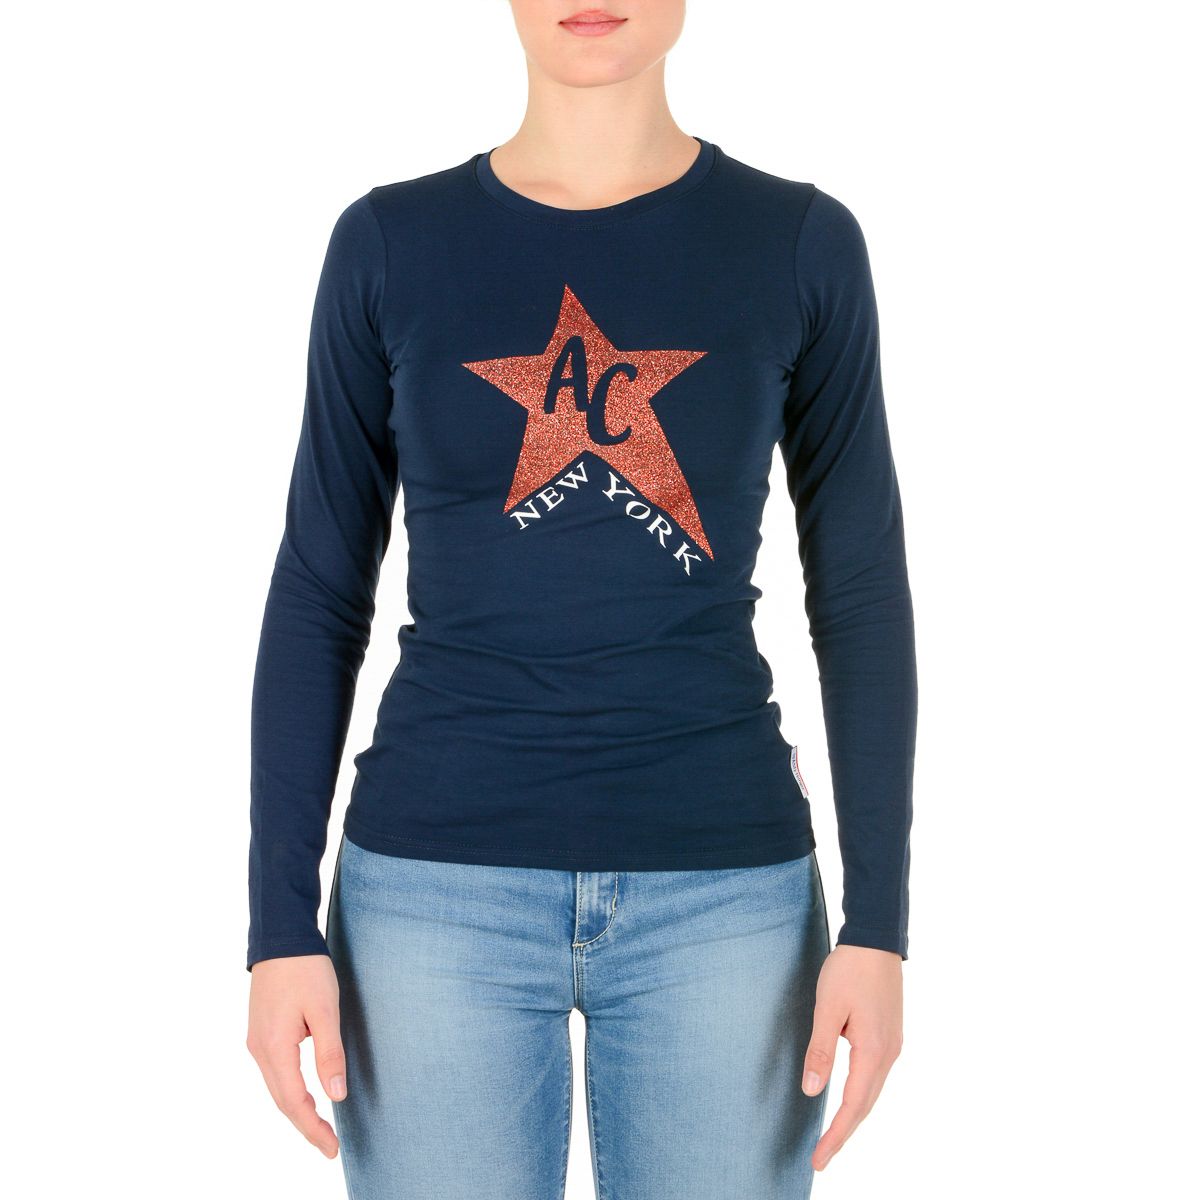 Andrew Charles By Andy Hilfiger Womens LS T-Shirt TS602 031002 PHENIX NAVY S8